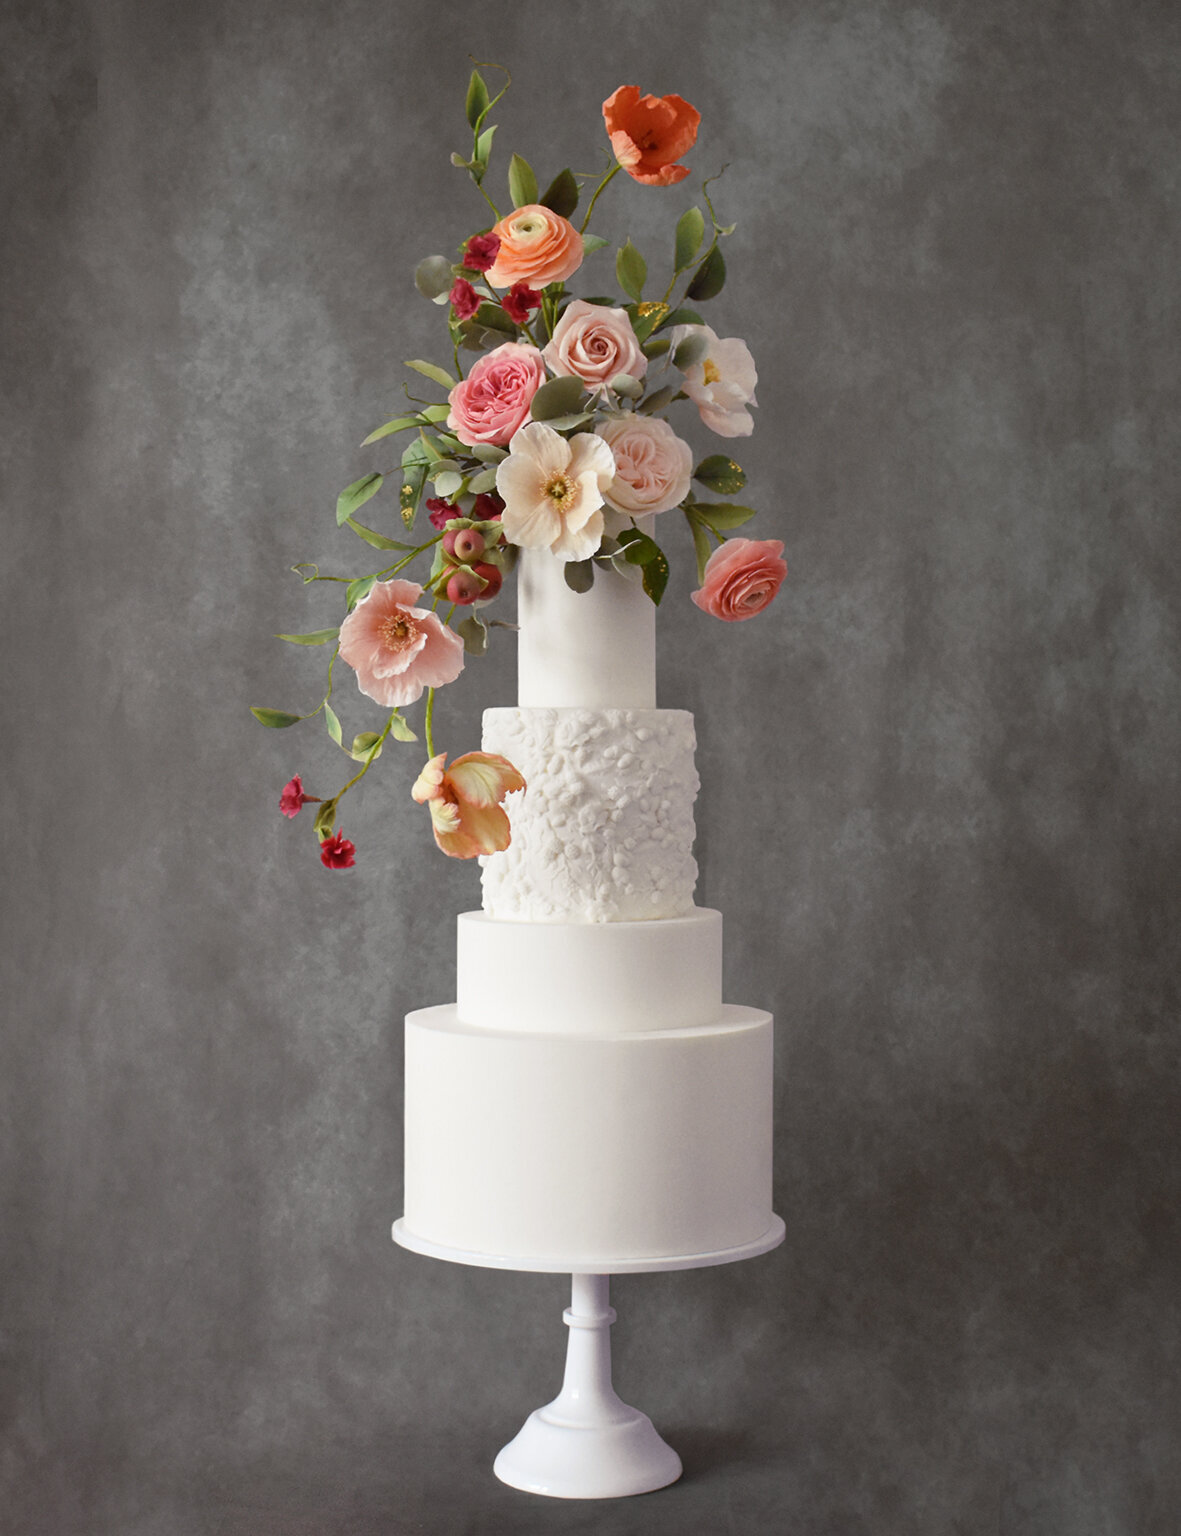 A white four tiered wedding cake with bas relief detail and Dutch Master style sugar flower arrangement